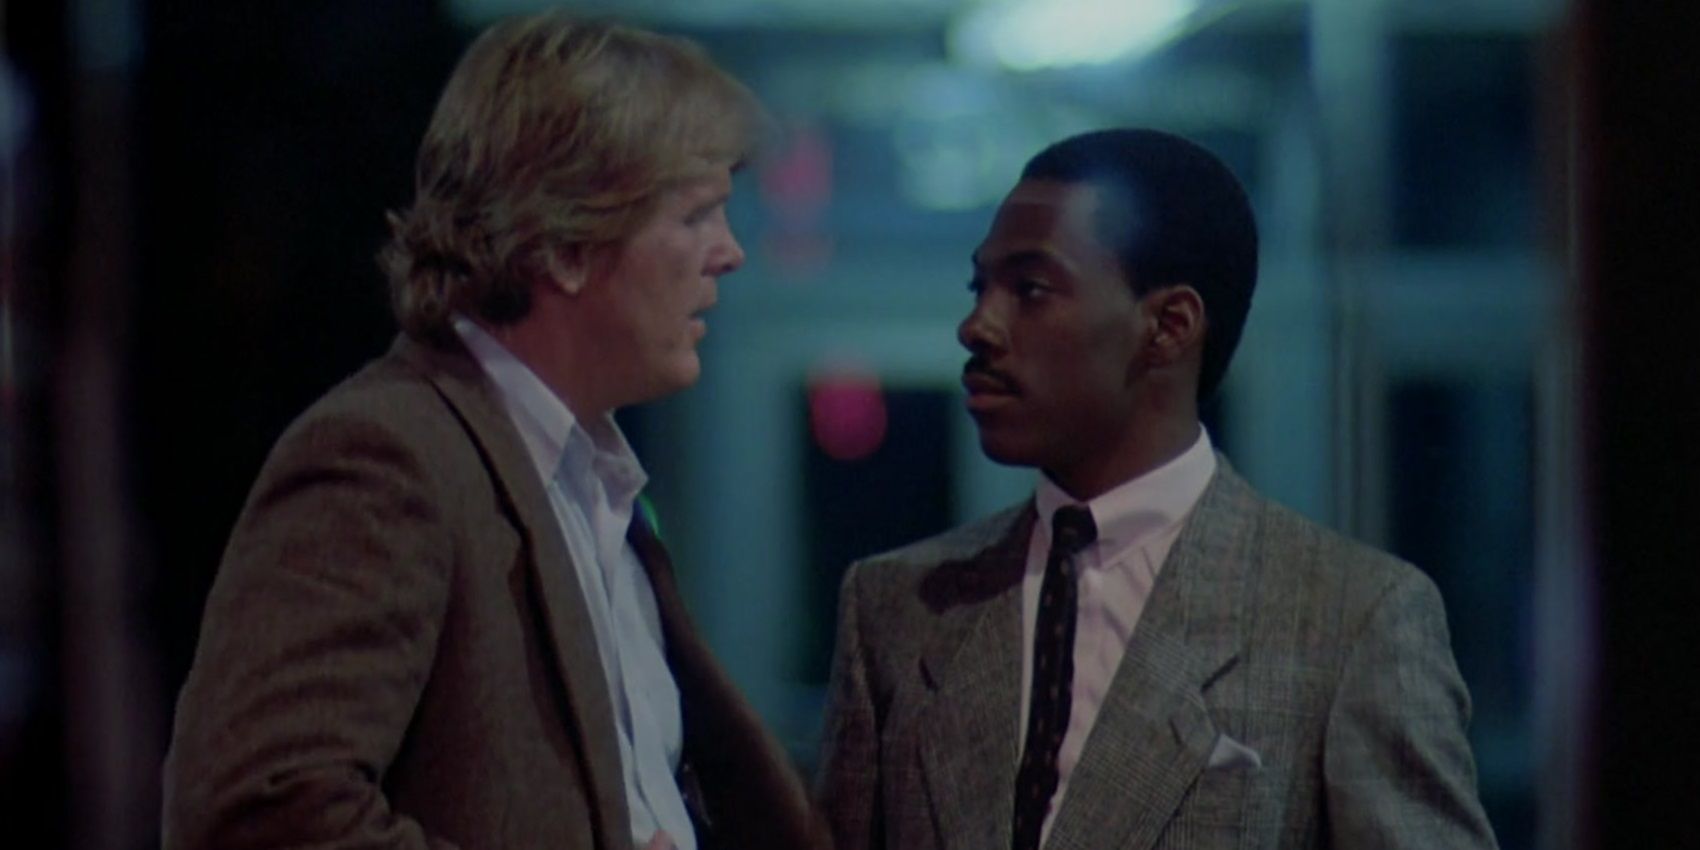 Nick Nolte and Eddie Murphy in 48 Hrs